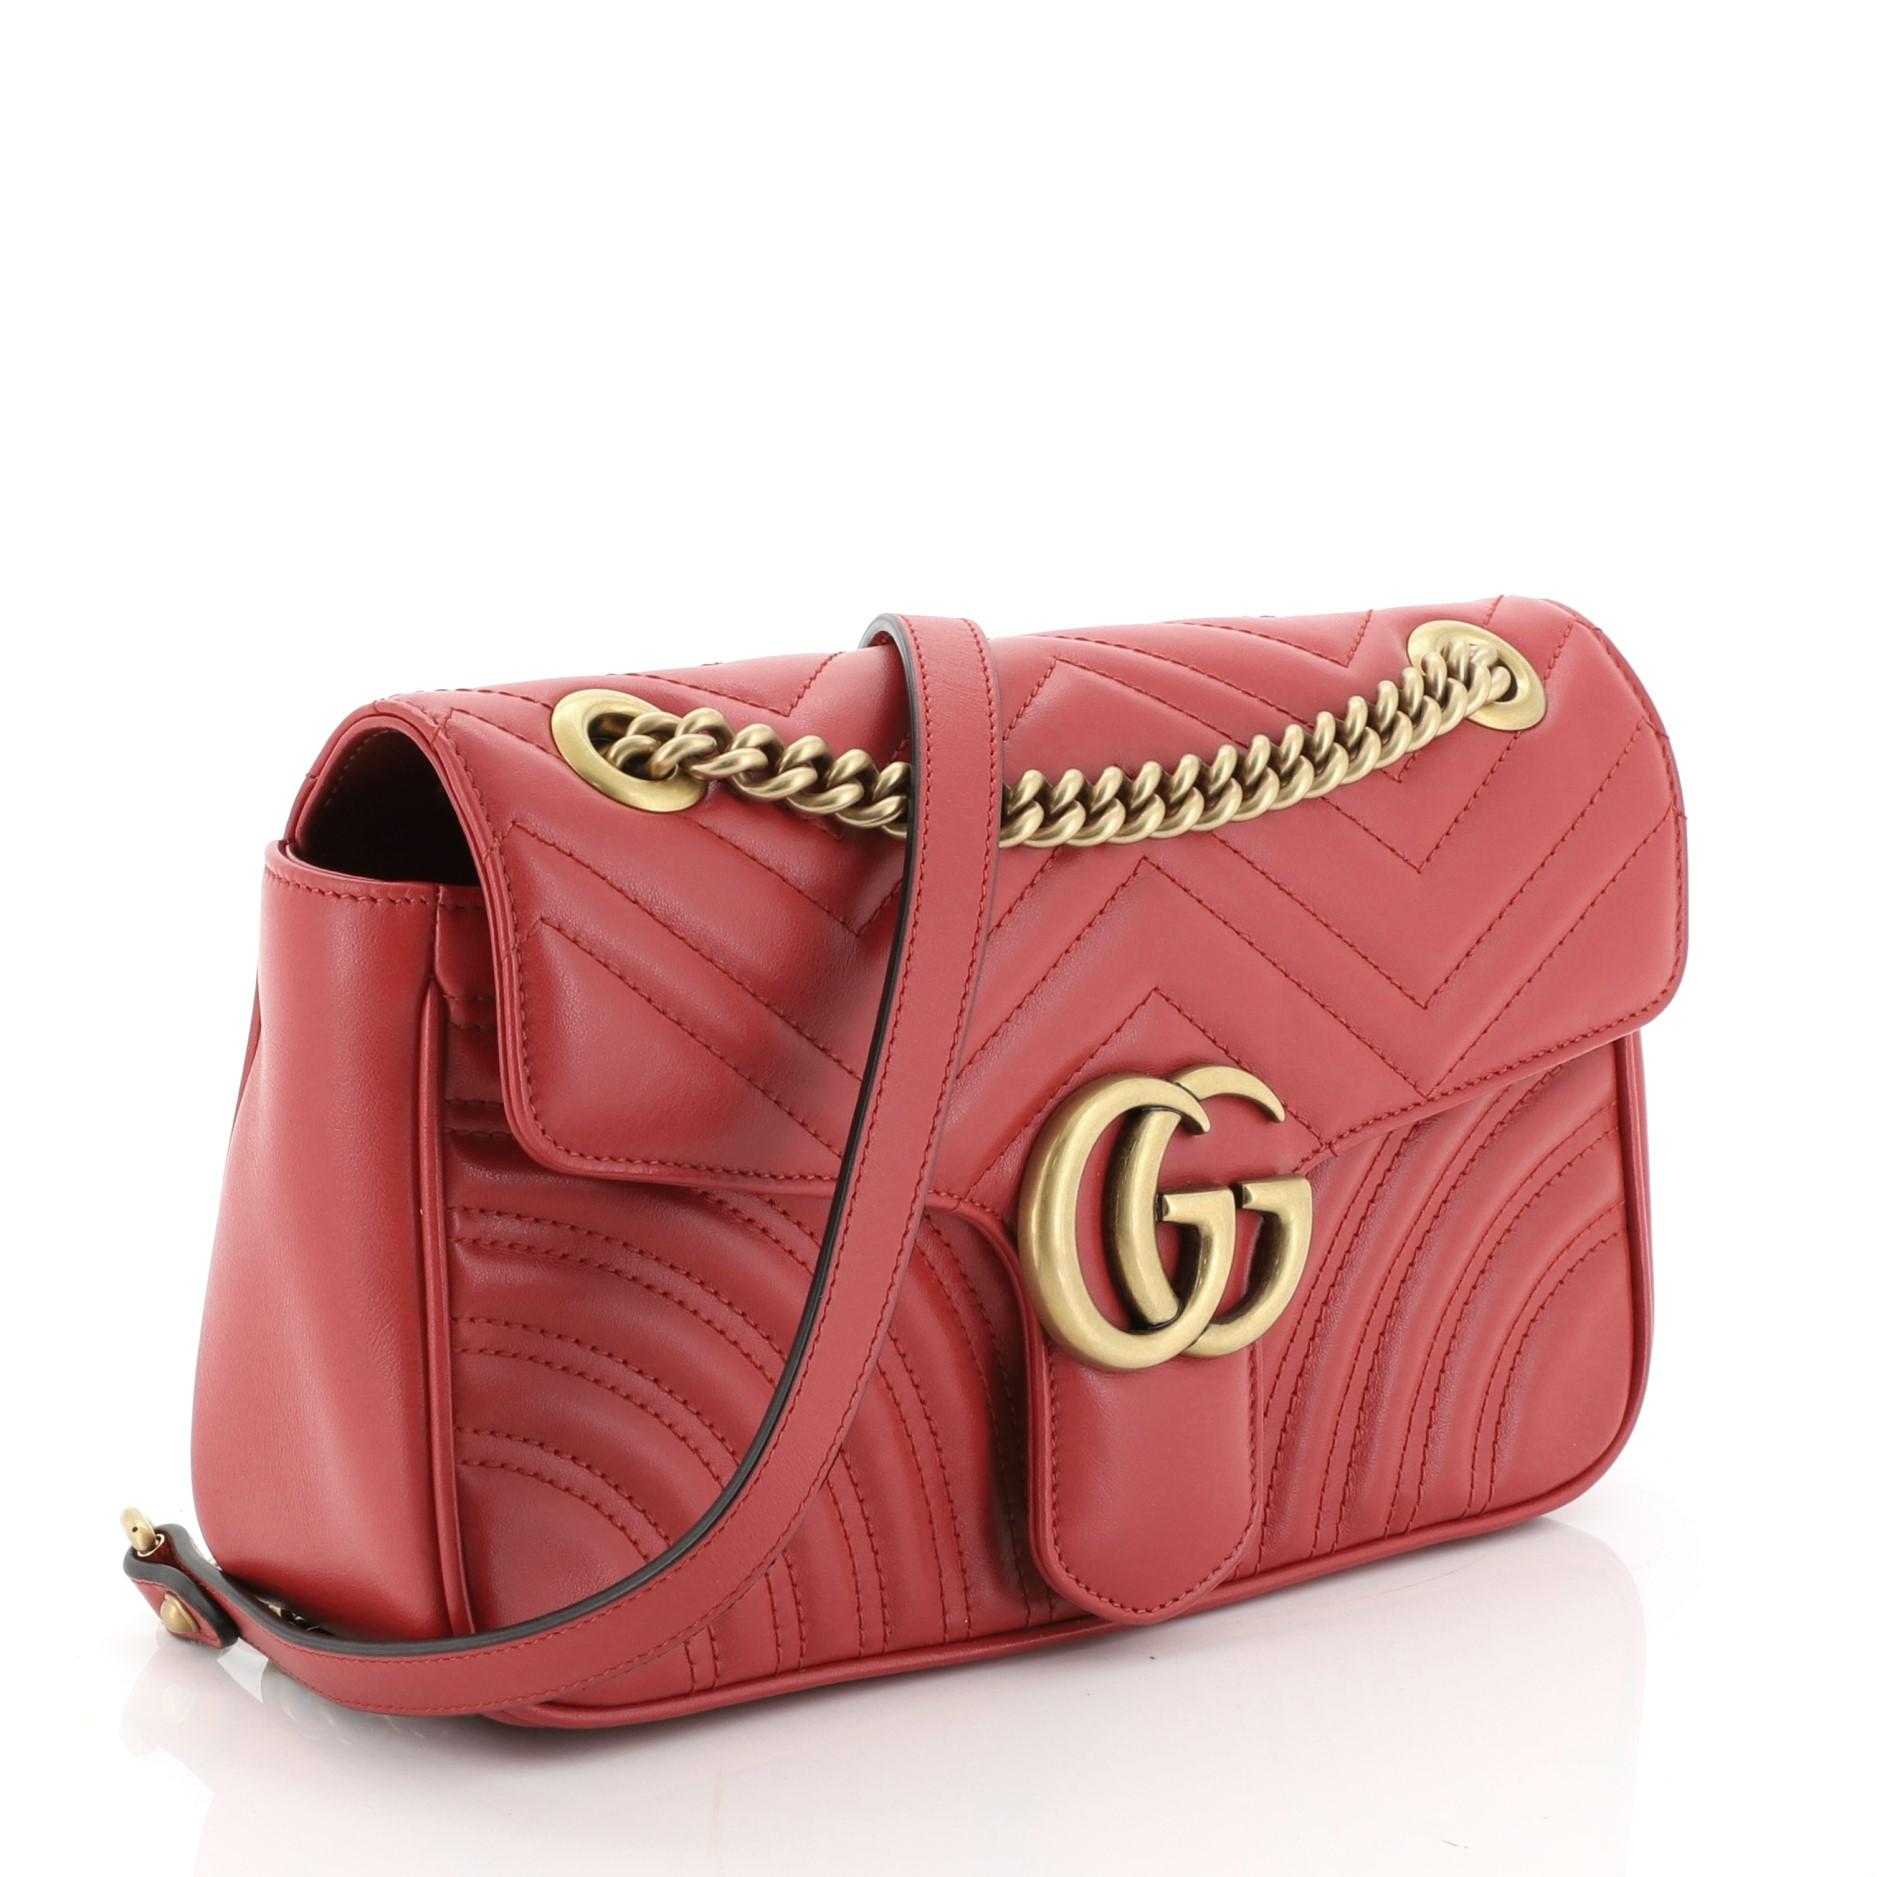 This Gucci GG Marmont Flap Bag Matelasse Leather Small, crafted from red matelasse leather, features a chain link strap with leather pad, flap top with GG logo, and aged gold-tone hardware. Its push-lock closure opens to a neutral microfiber